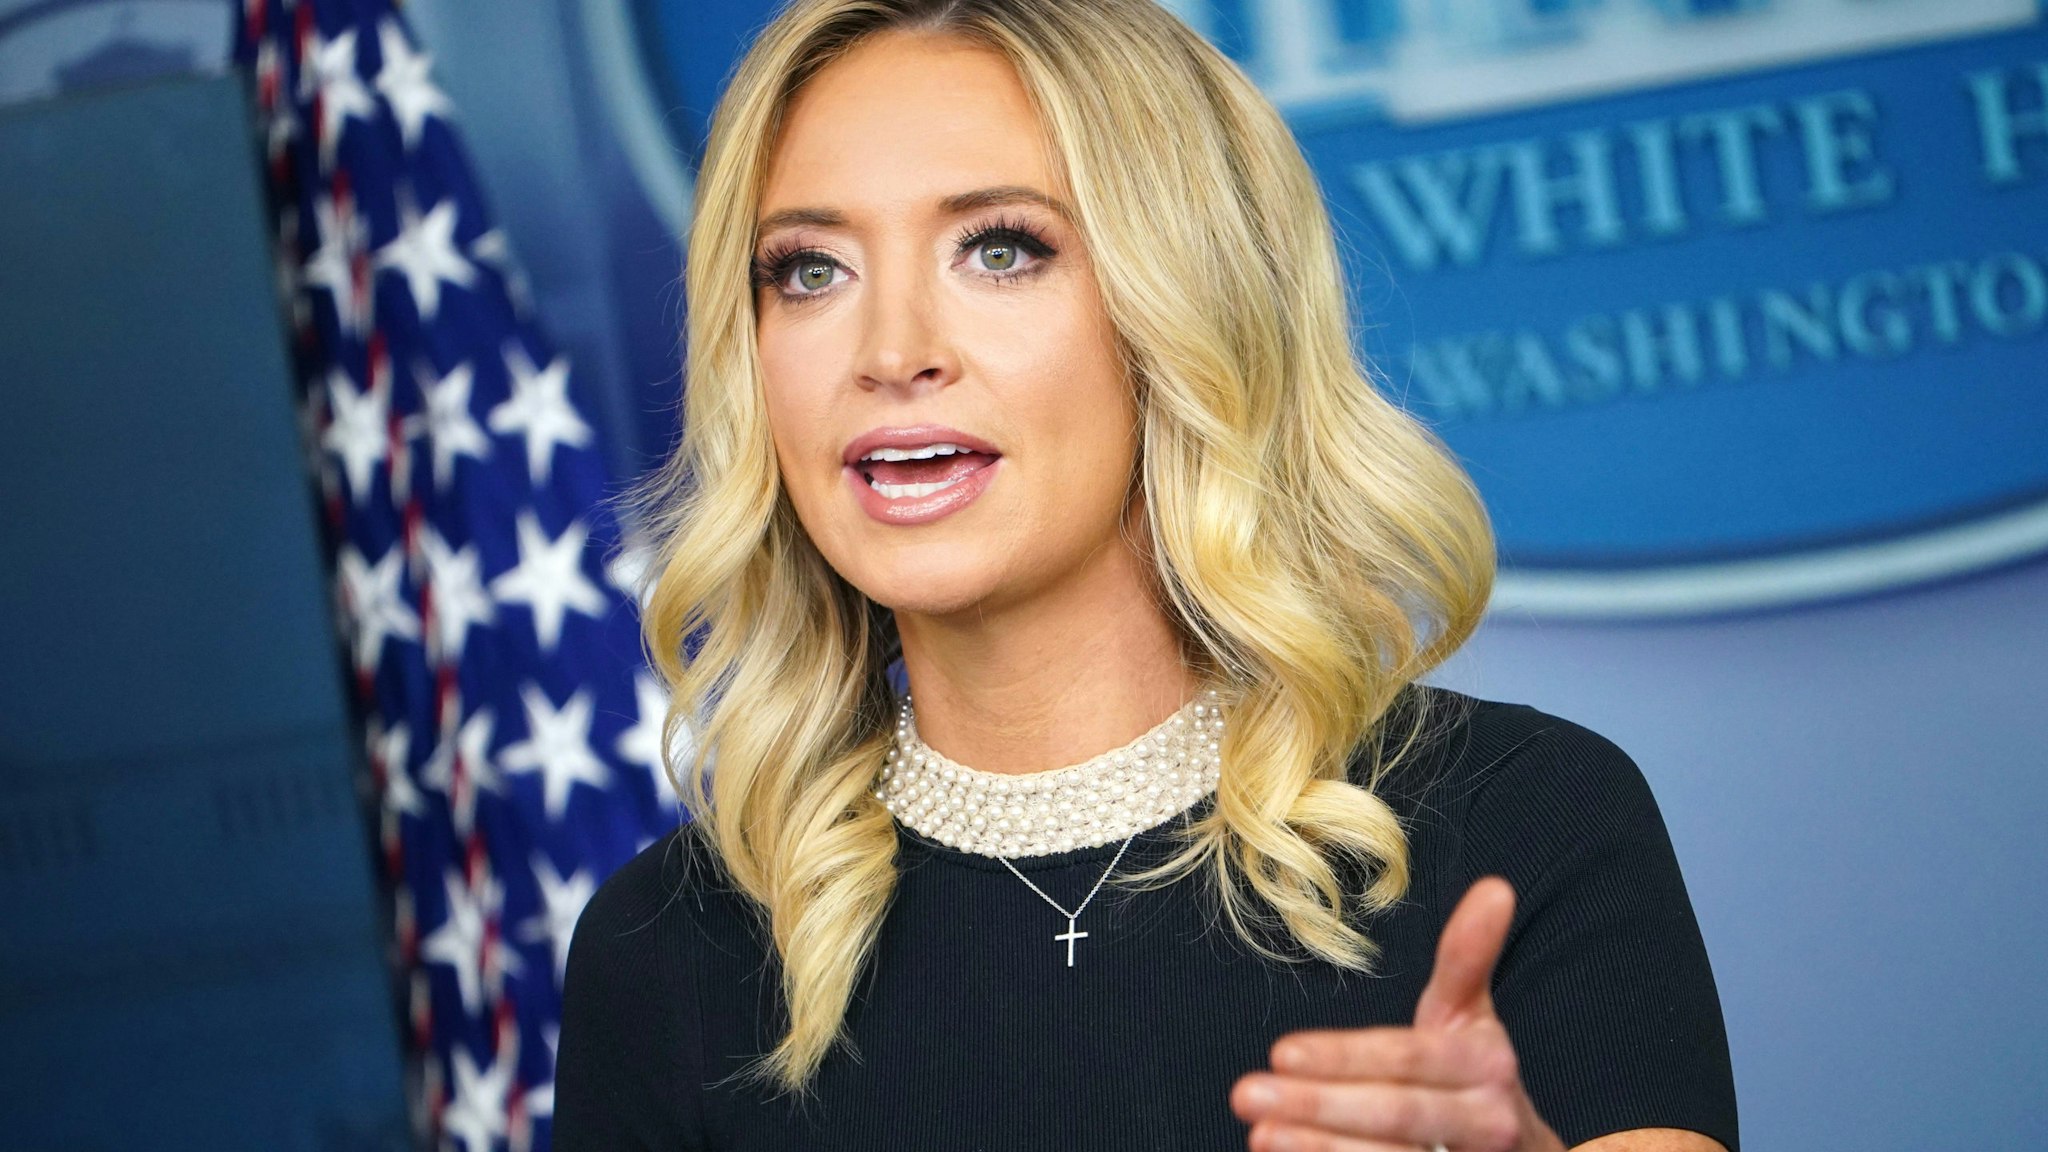 White House Press Secretary Kayleigh McEnany speaks to the press on May 15, 2020, in the Brady Briefing Room of the White House in Washington, DC.